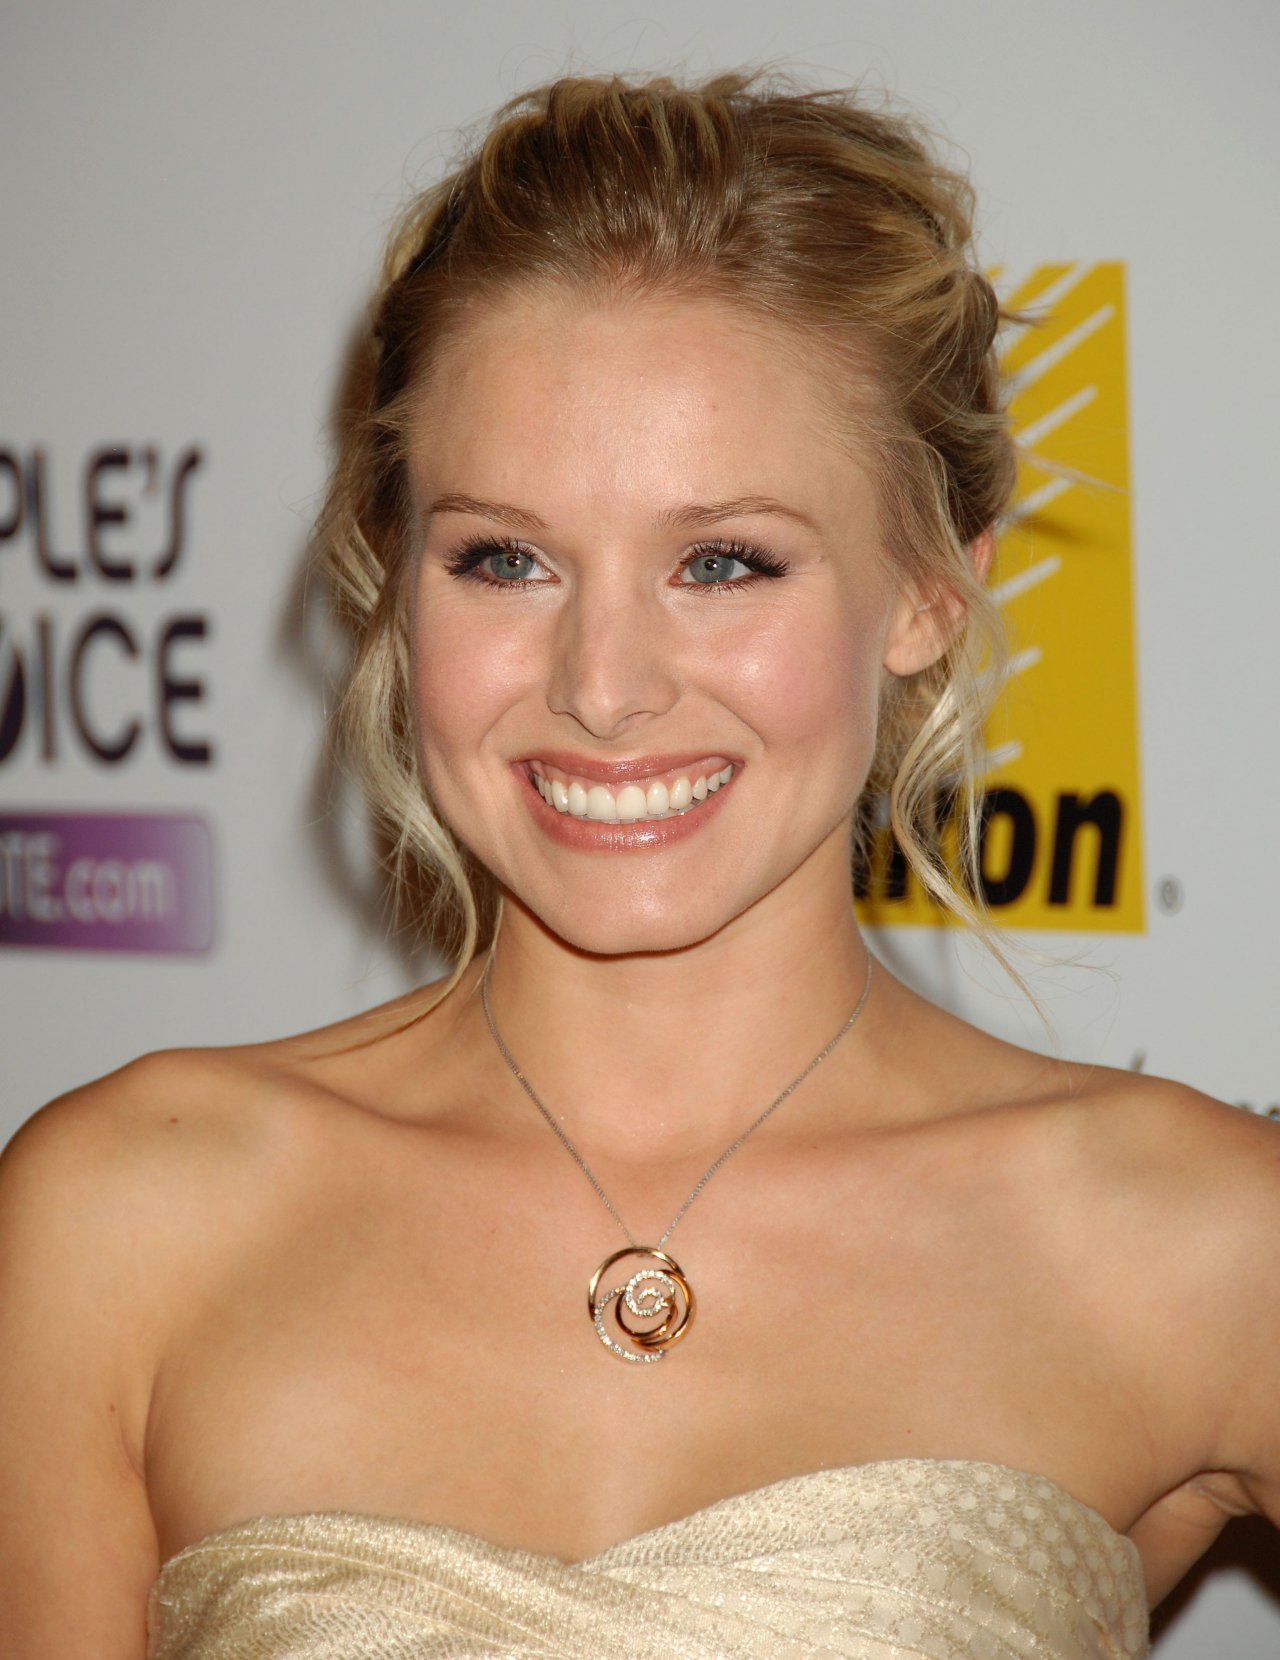 Beautiful Kristen Bell pictures and photos.